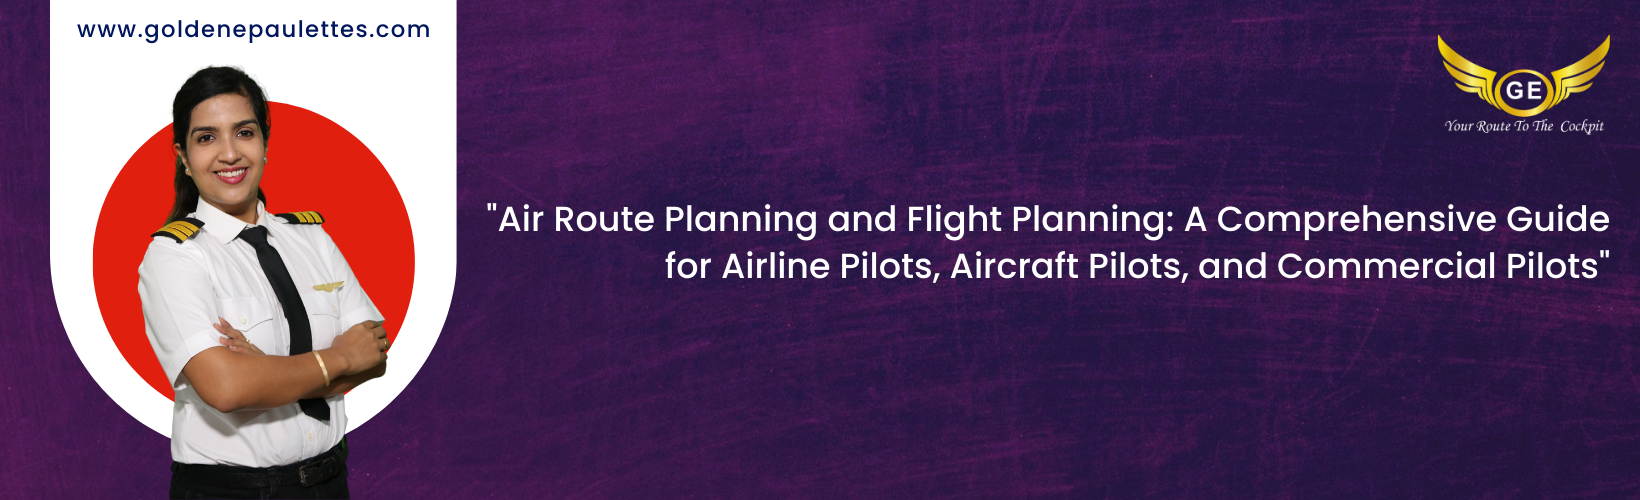 Air Route Planning and Flight Planning